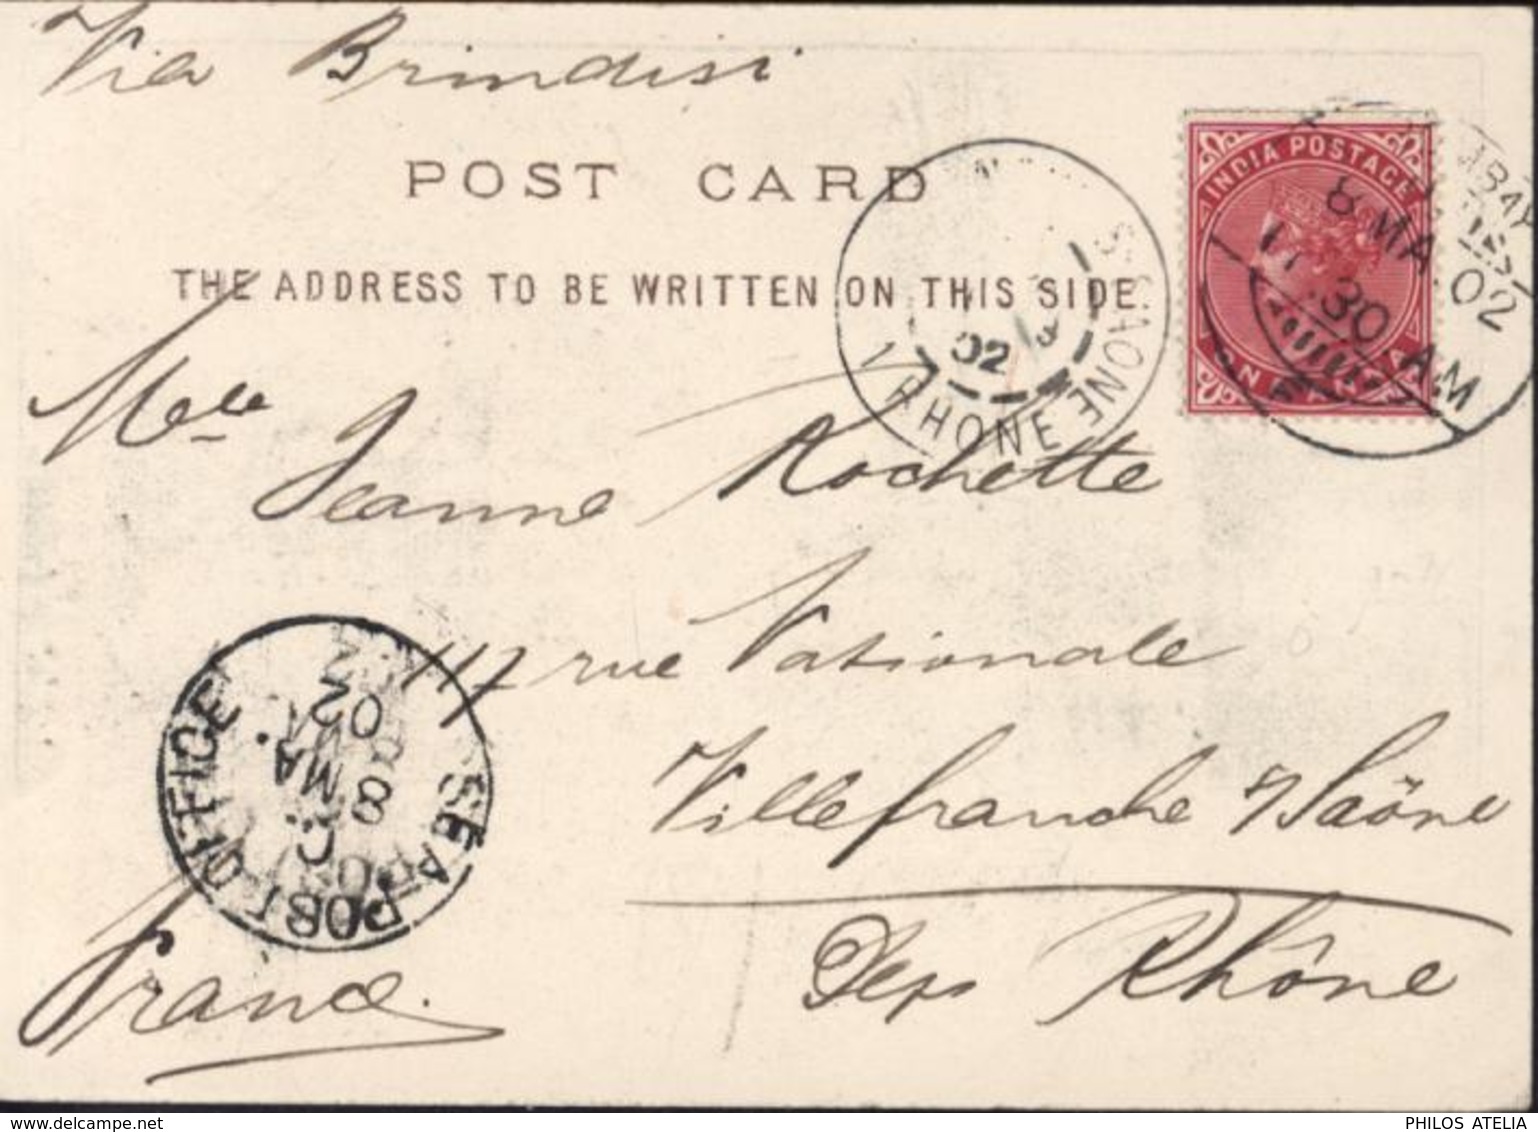 YT 54 1A Rouge Carminé Victoria India Postage CAD Bombay 8 MA 02 CAD Sea Post Office 8 MA 02 CPA Public Buildings Bombay - 1882-1901 Imperio